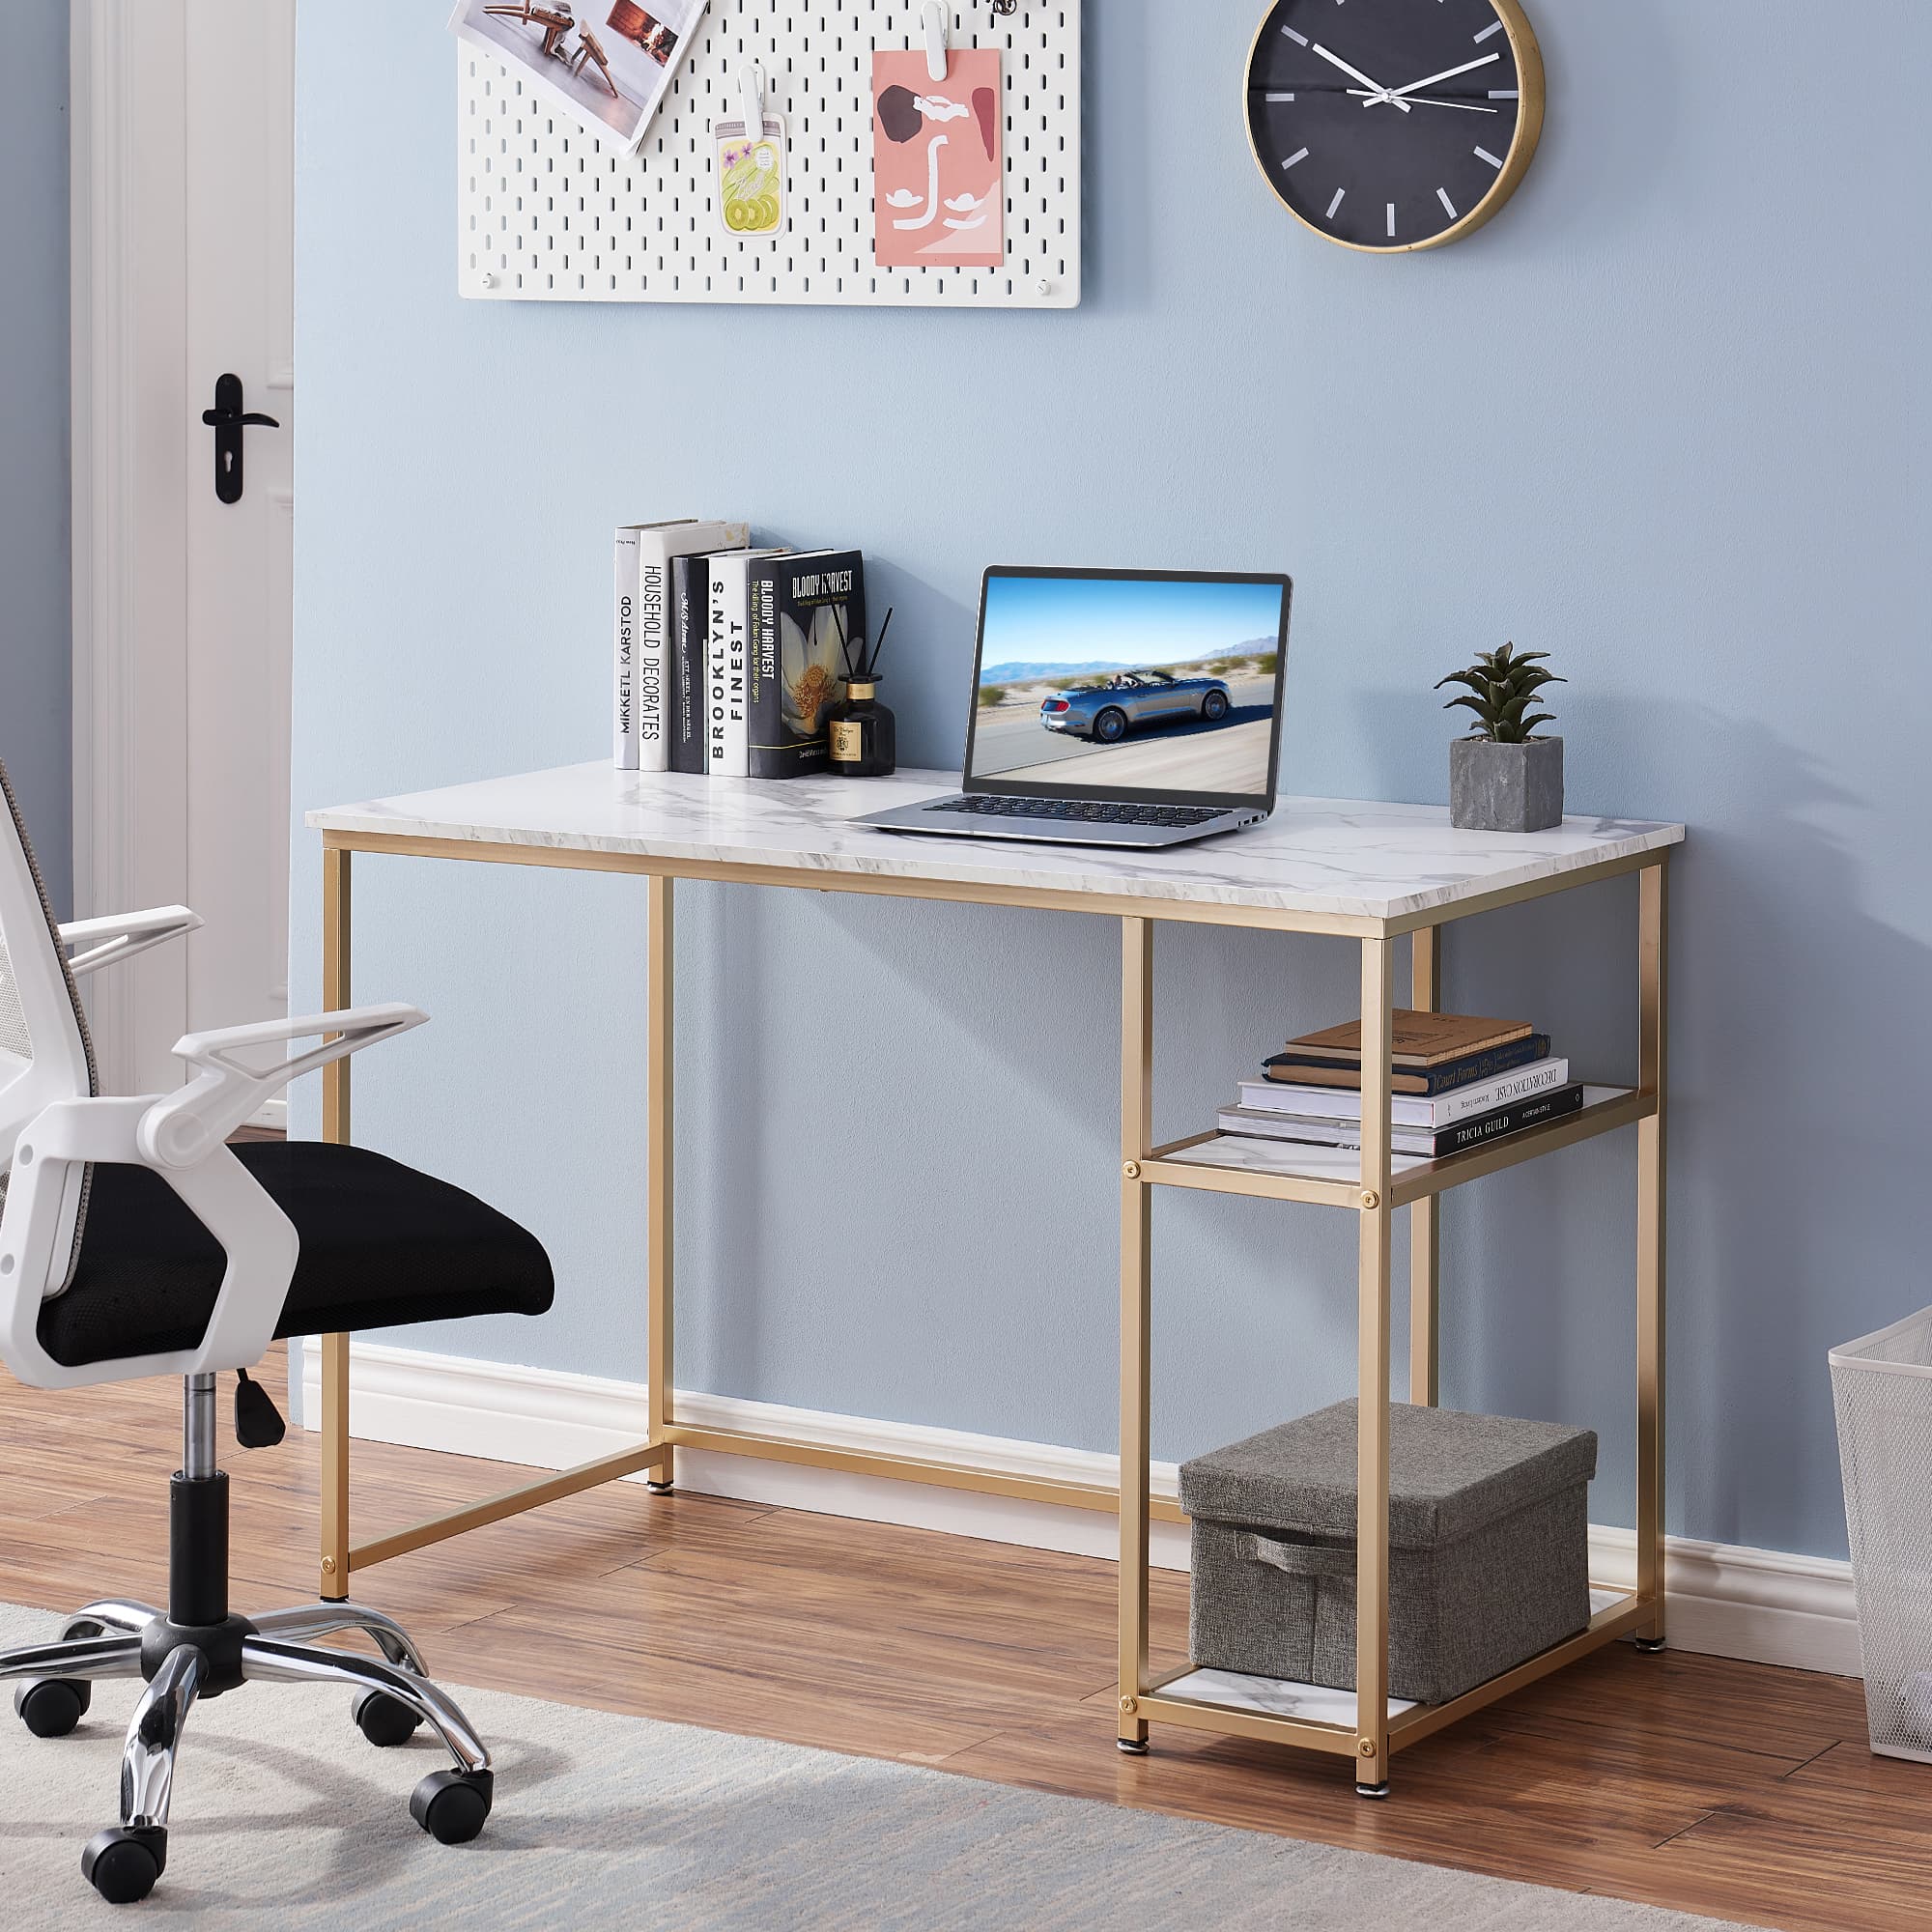 Ivinta Computer Desk with Shelves, Office Desk for Living Room,Small Desk with Storage